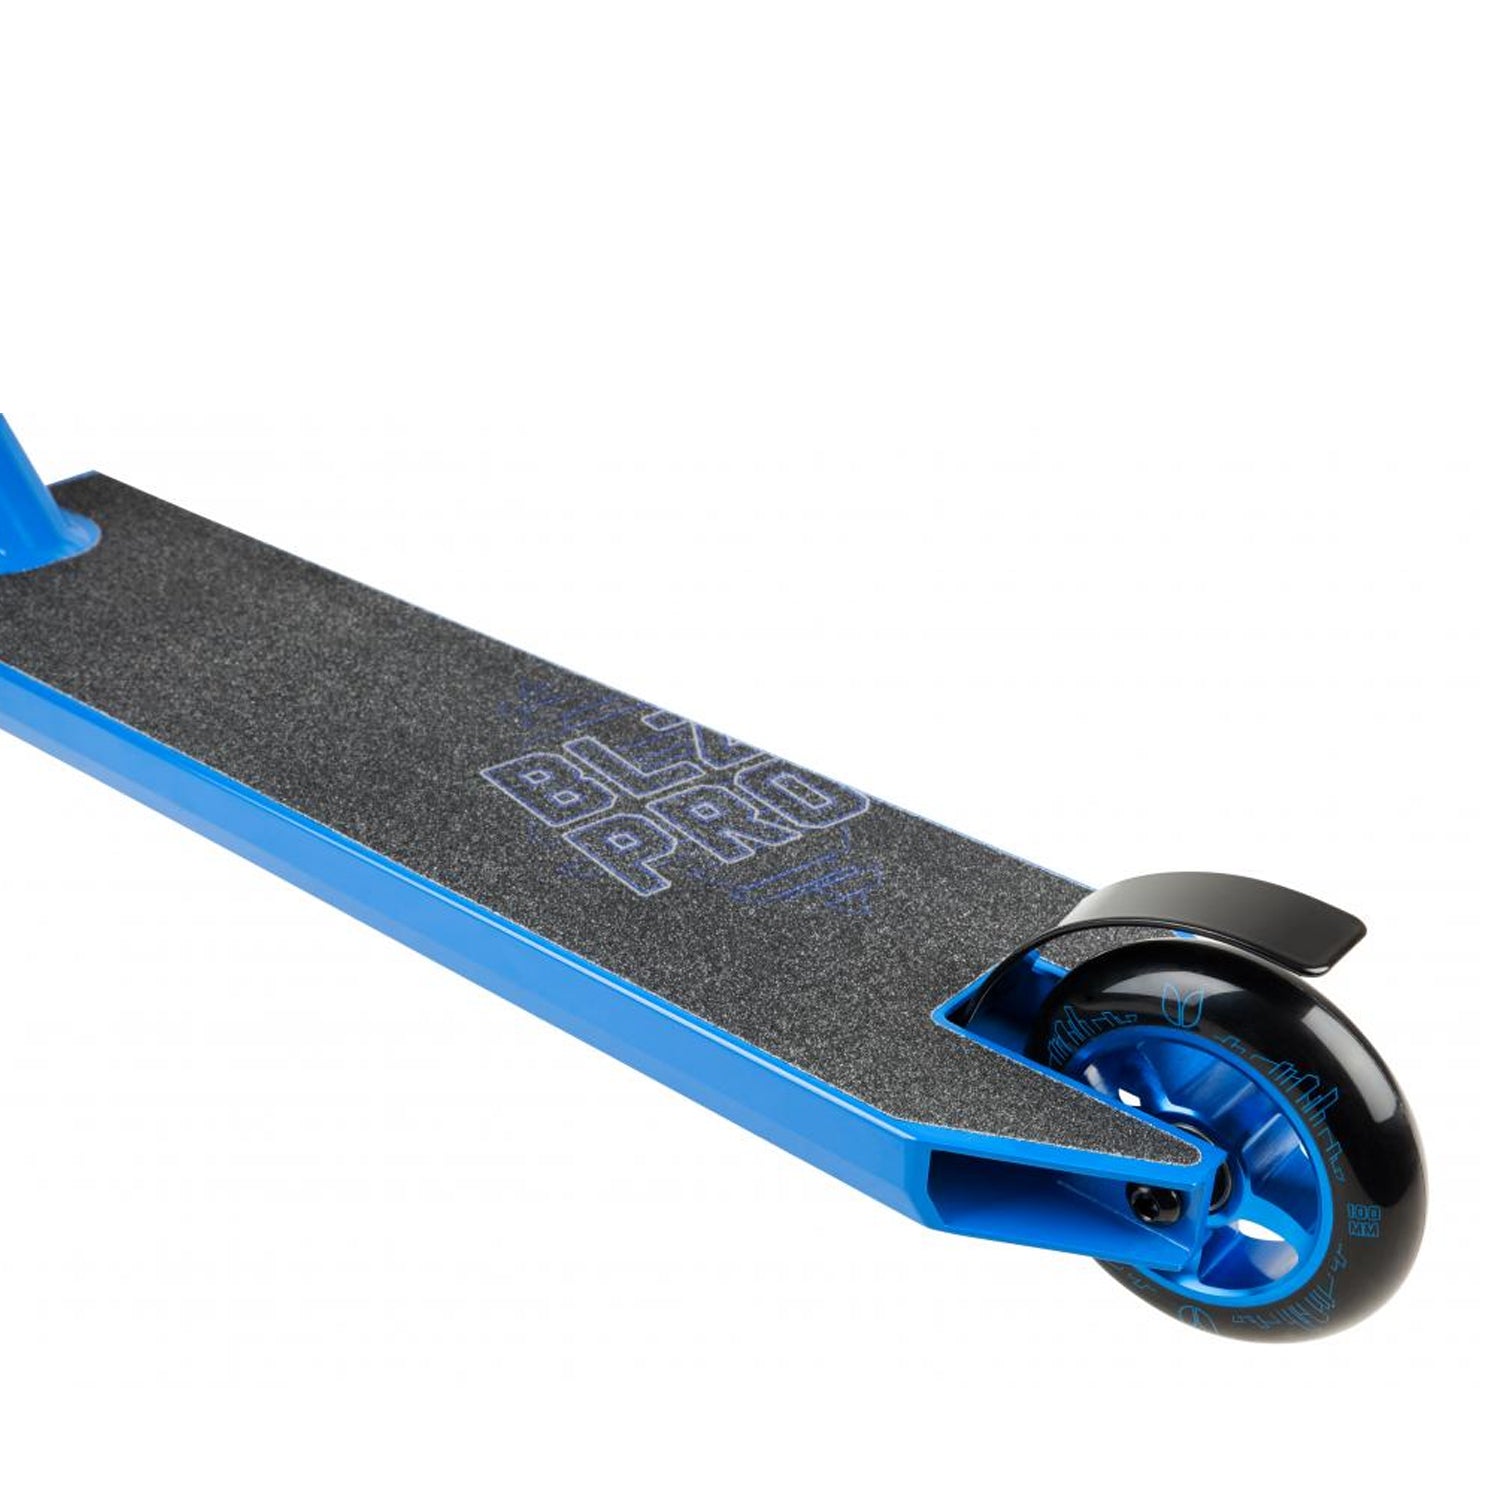 Blazer Pro Complete Outrun Scooter - Blue - Prime Delux Store